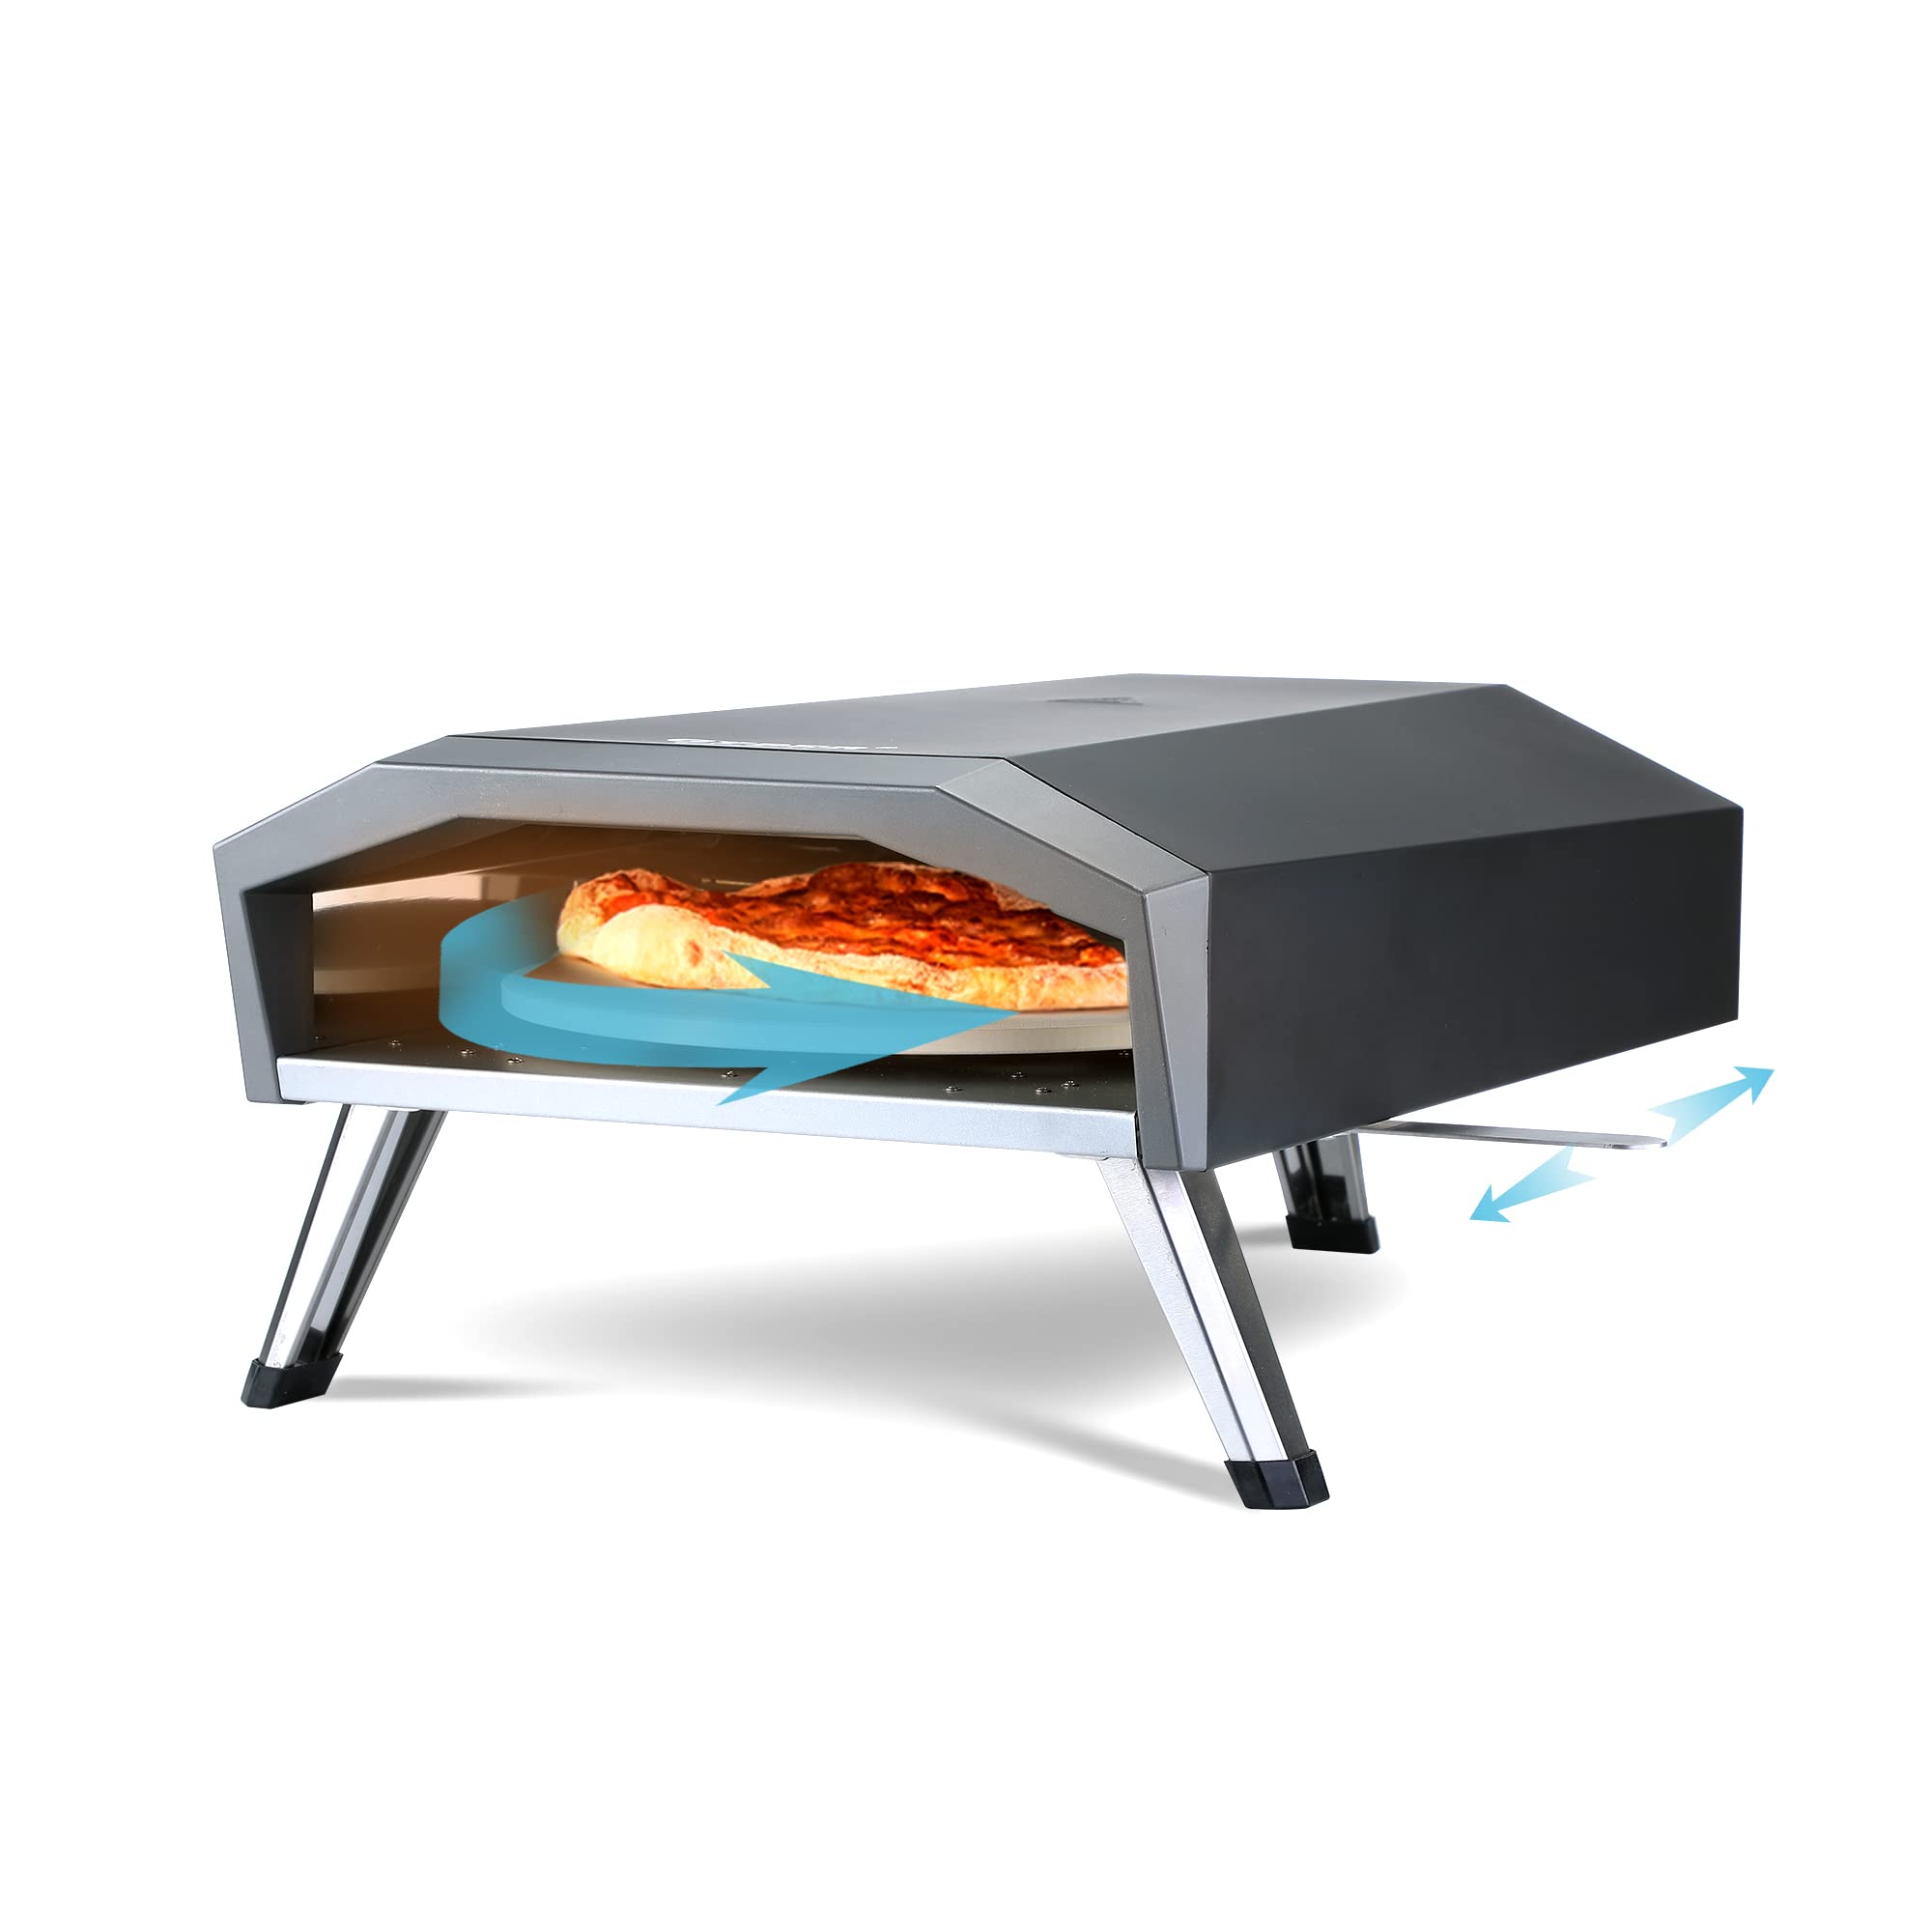 13" Outdoor Gas Pizza Oven - Portable and Rotatable